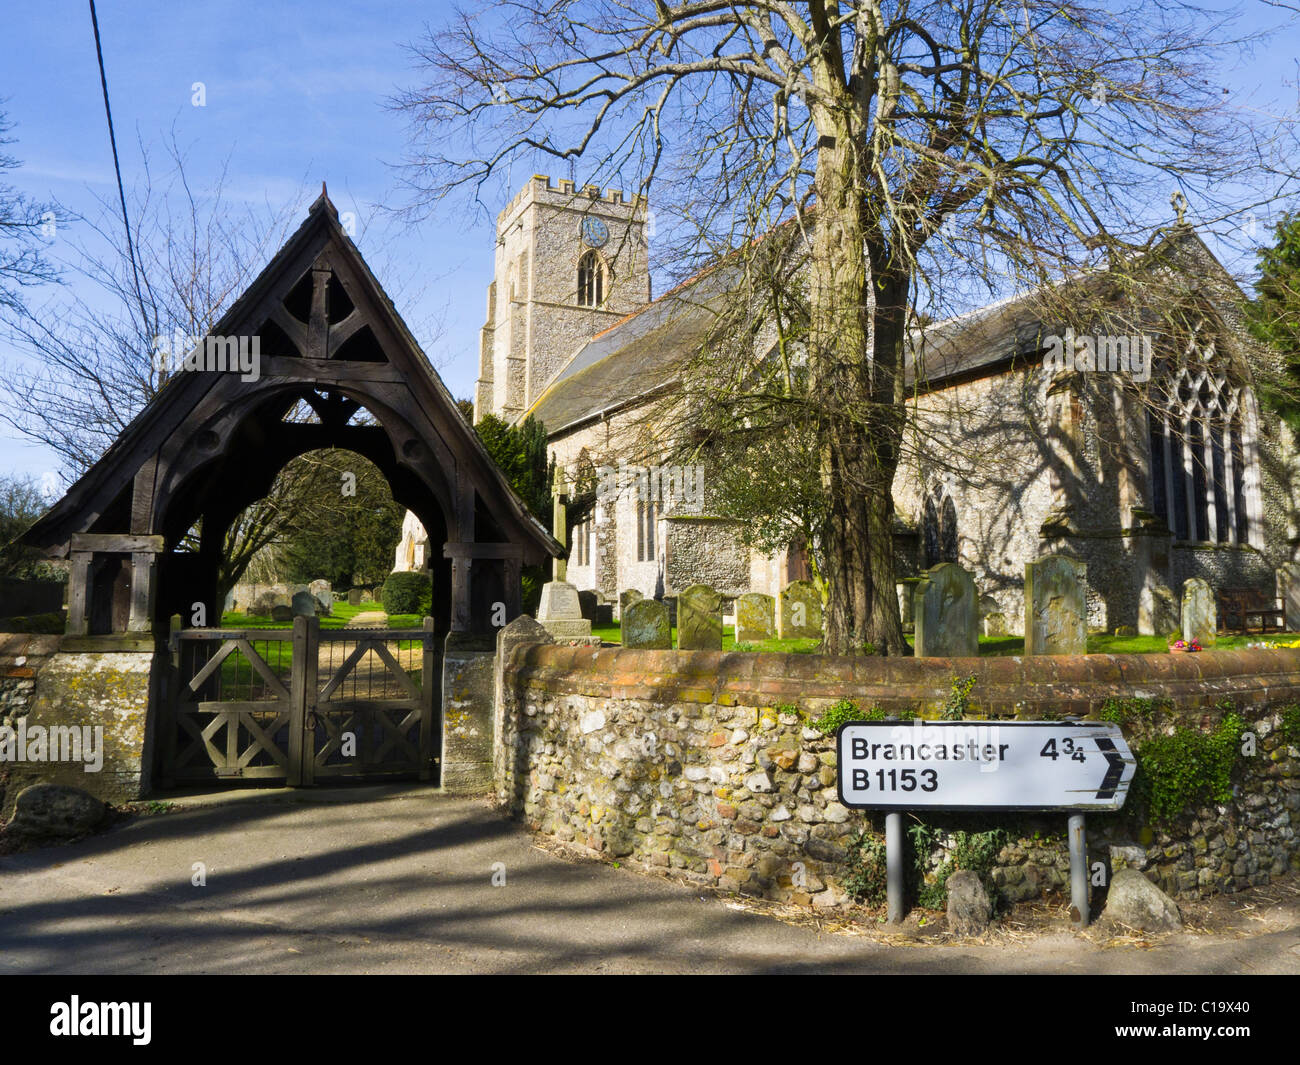 The church of St. Mary the Virgin at Docking in Norfolk. Stock Photo